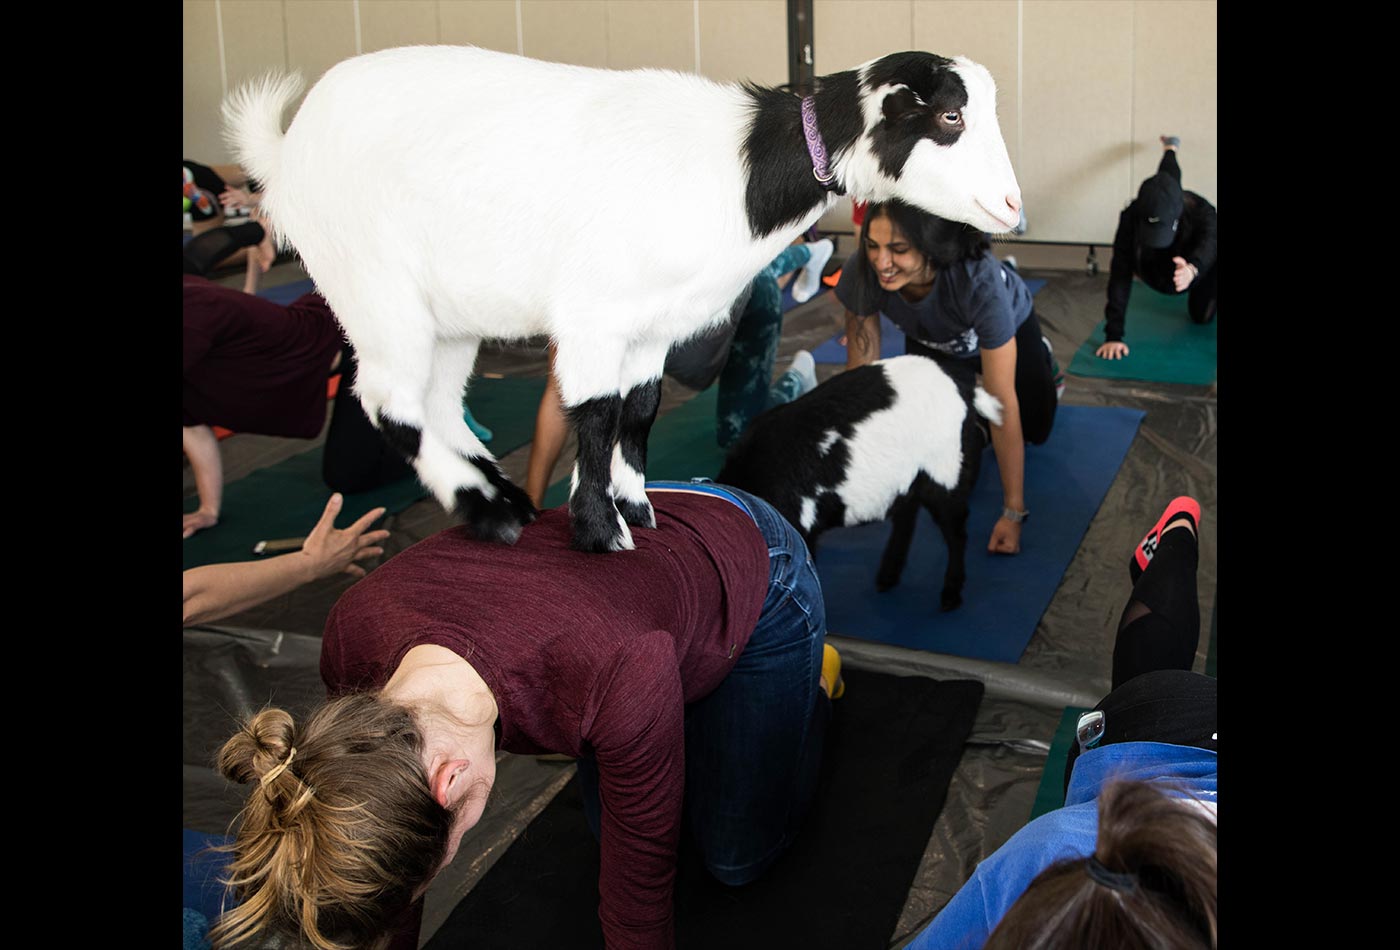 A black and white goat stands on top of a female graduate student's back while she is on all fours.